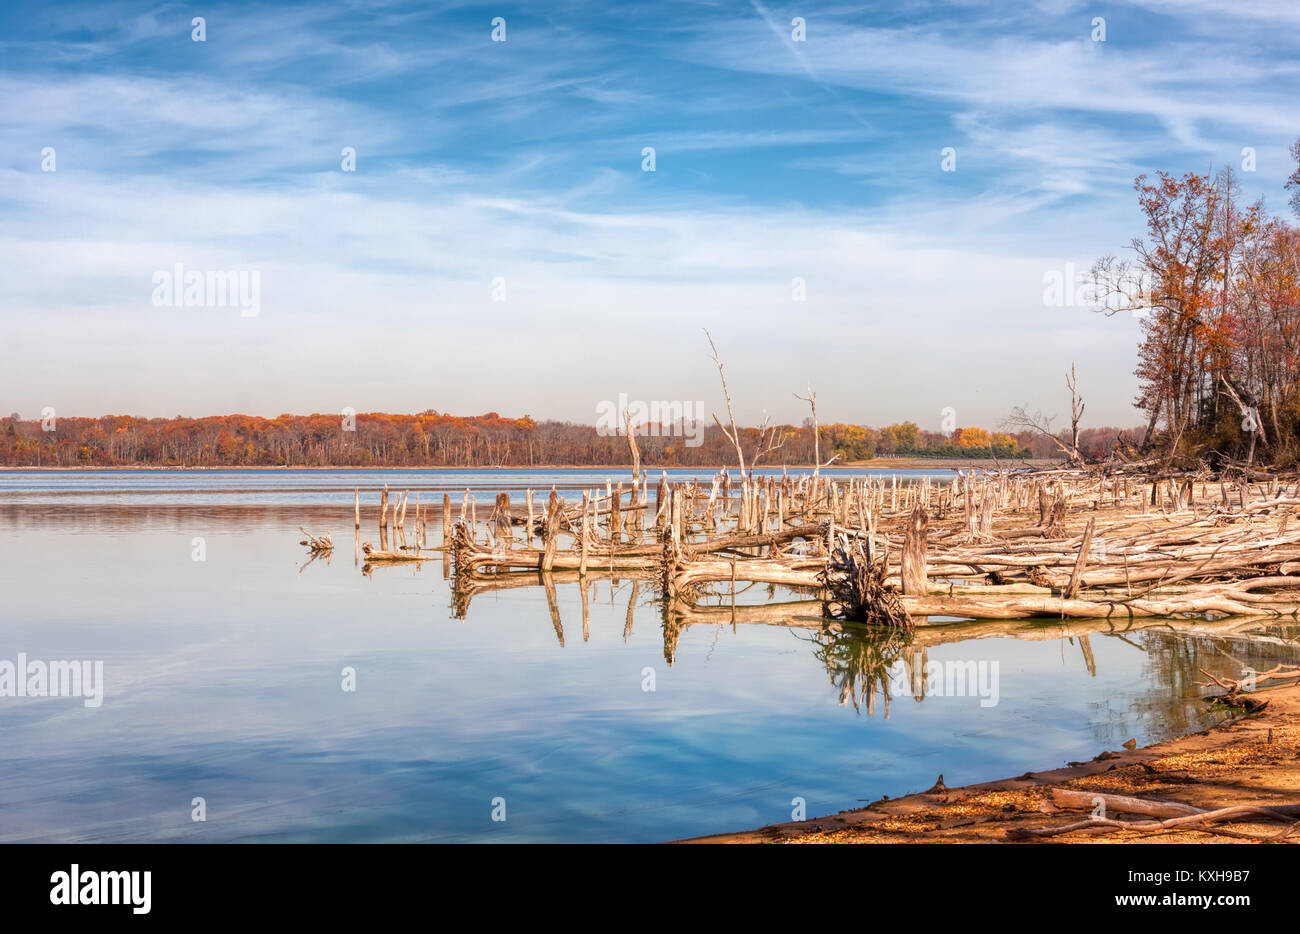 A lake with dead, fallen trees depicting deforestation Stock Photo